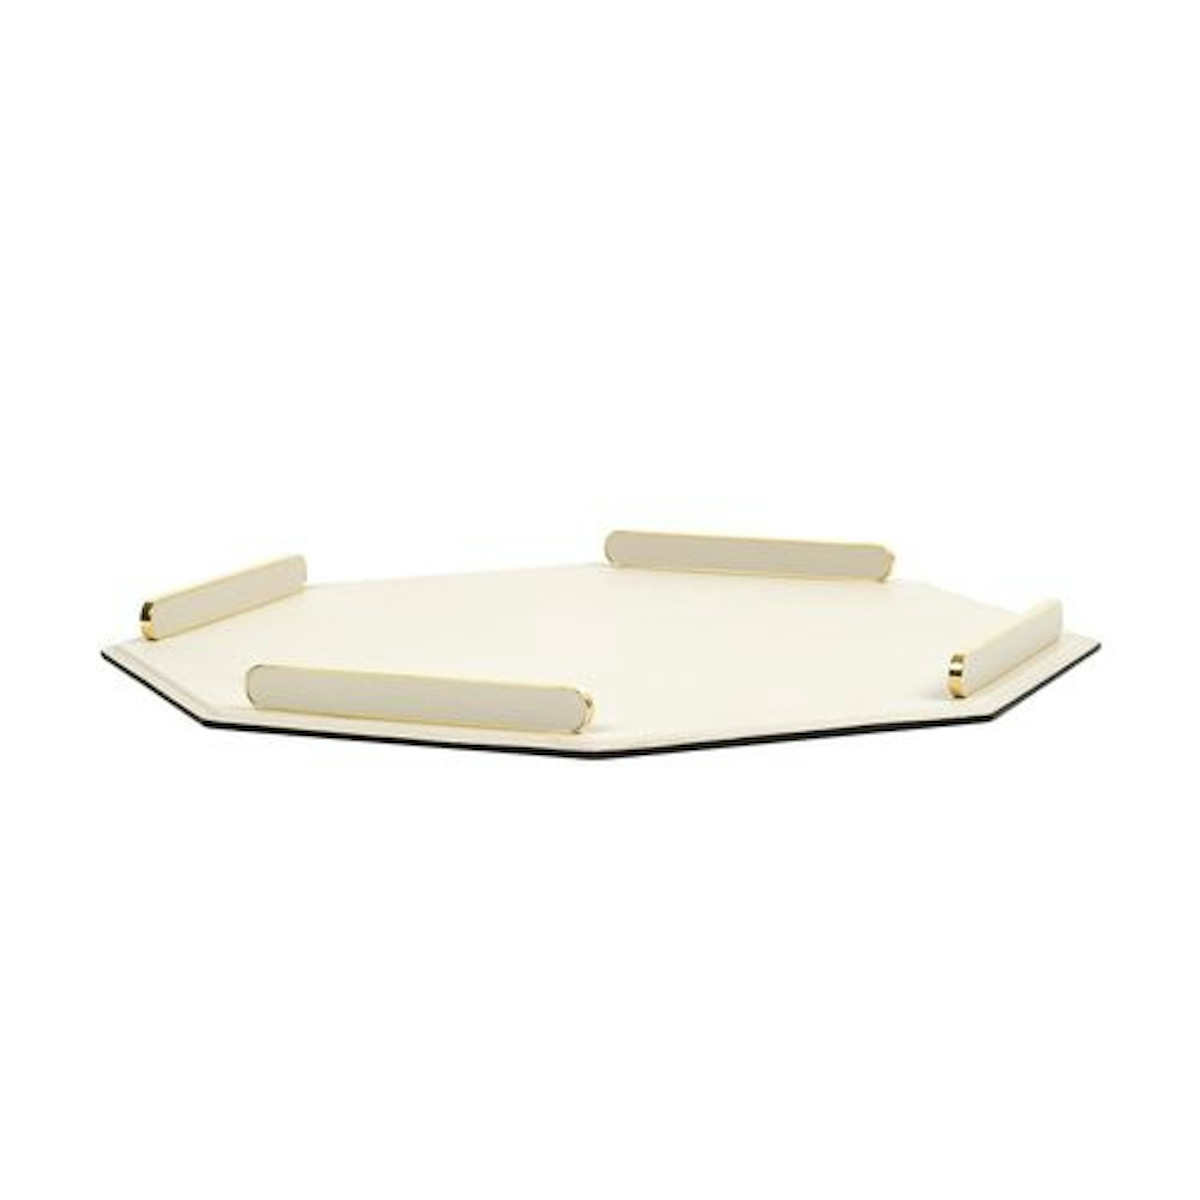 Este Octagonal Tray, Cream - 21 Best Decorative Trays To Buy For Your Tabletop - LuxDeco.com